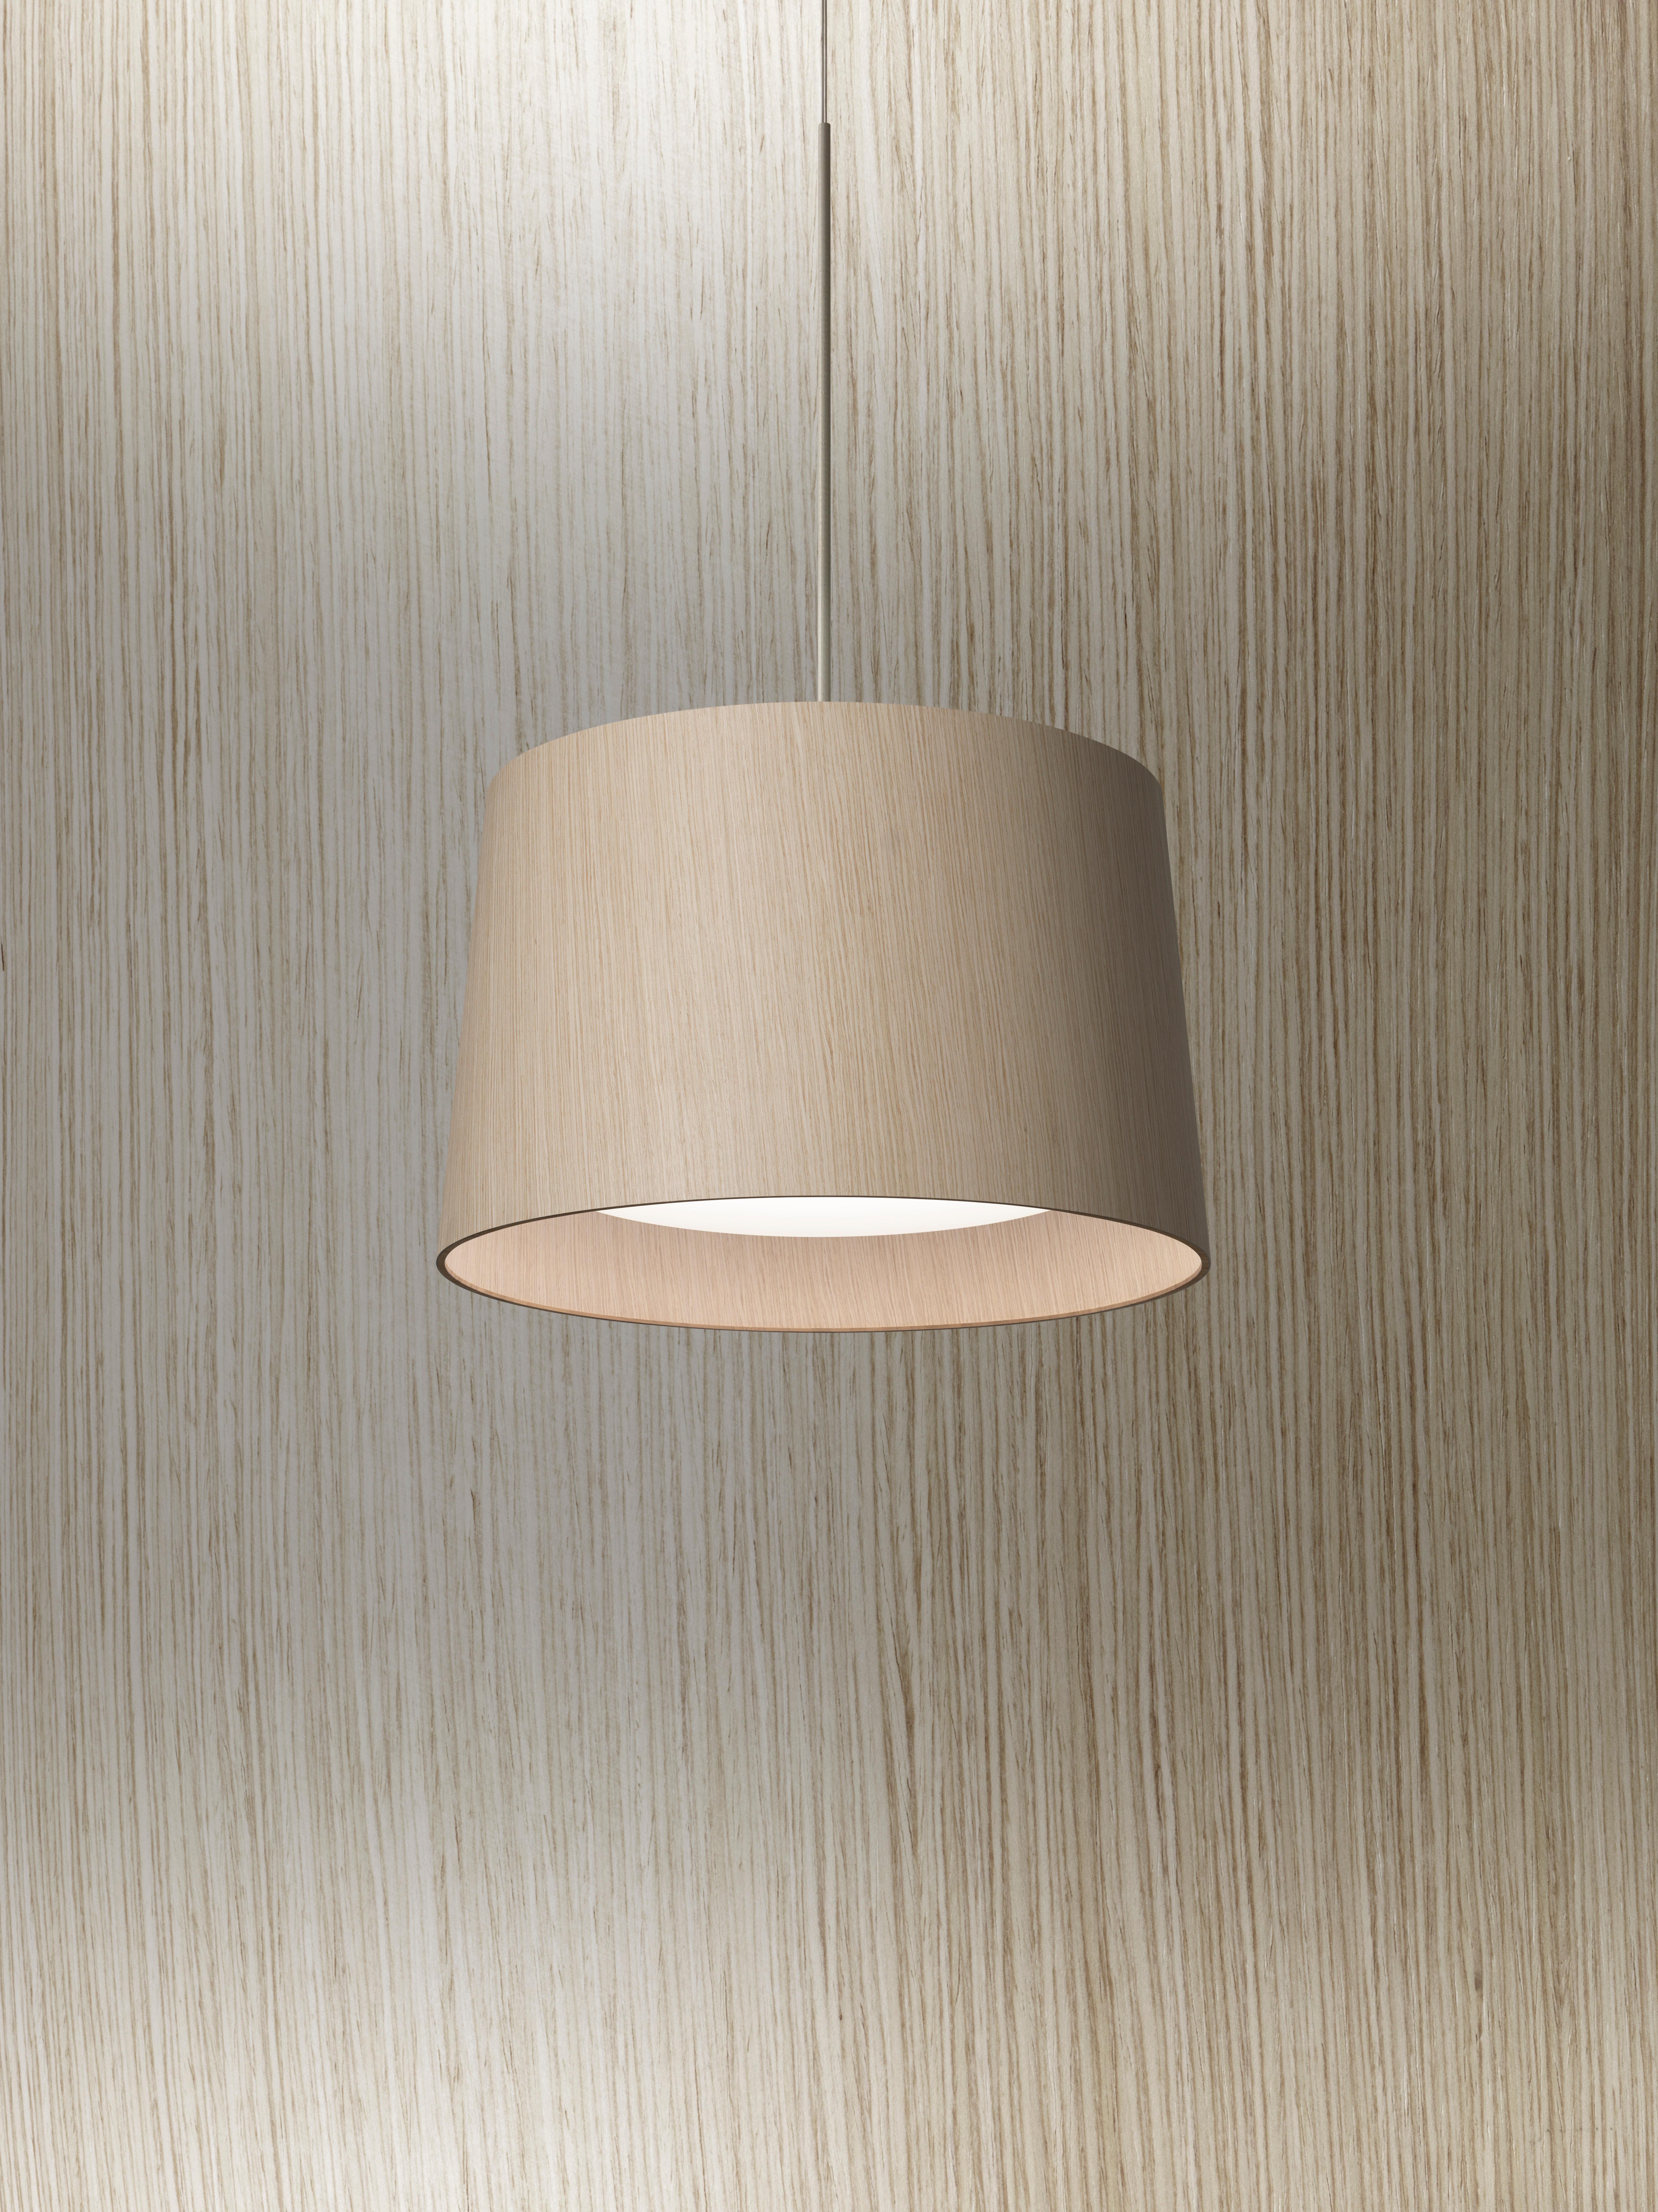 The new Twiggy wood suspension lamp is remarkably versatile, bringing the warmth and appeal of wood into a wide range of contexts.
It is perfect above a table, in a bedroom, kitchen, living area or entrance, but also in high-image spaces. 
Twiggy